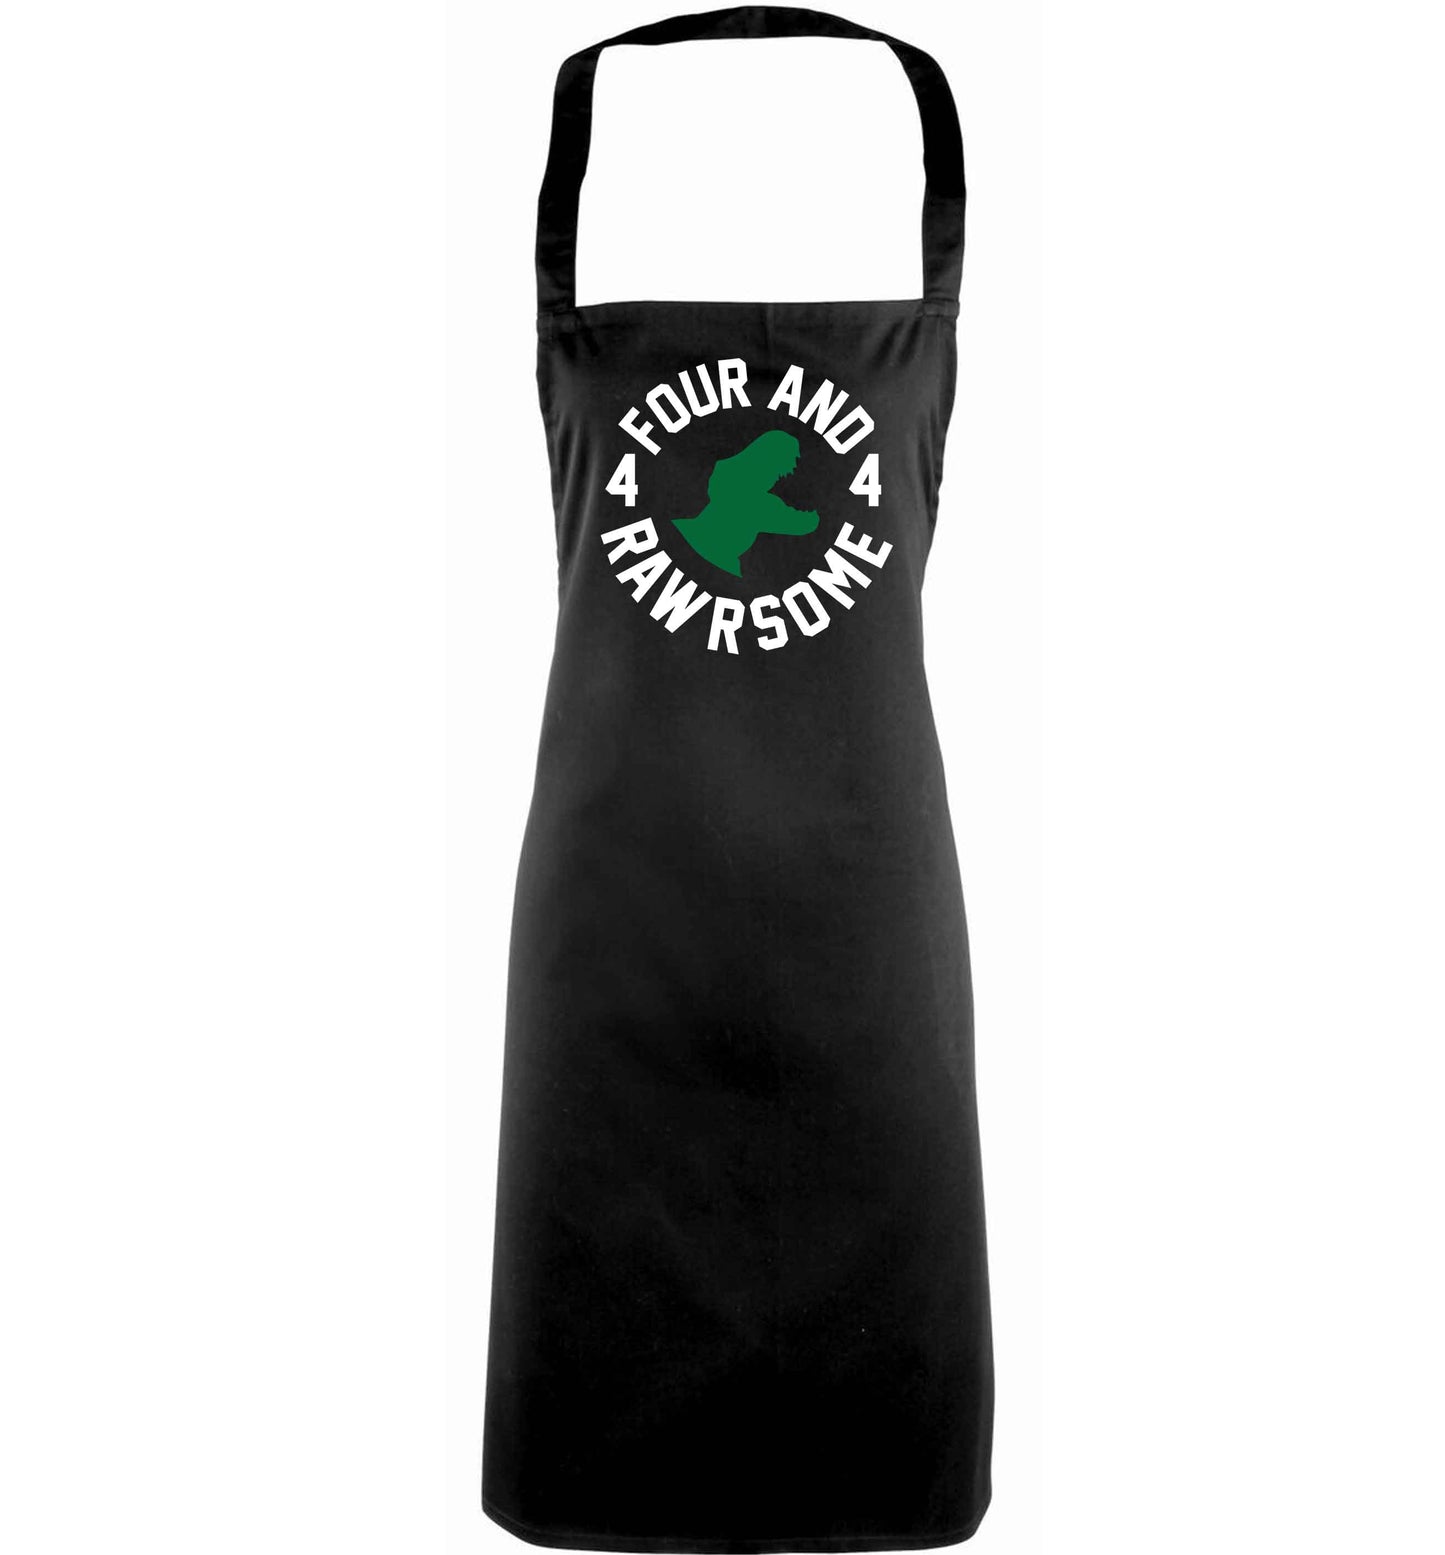 Four and rawrsome adults black apron